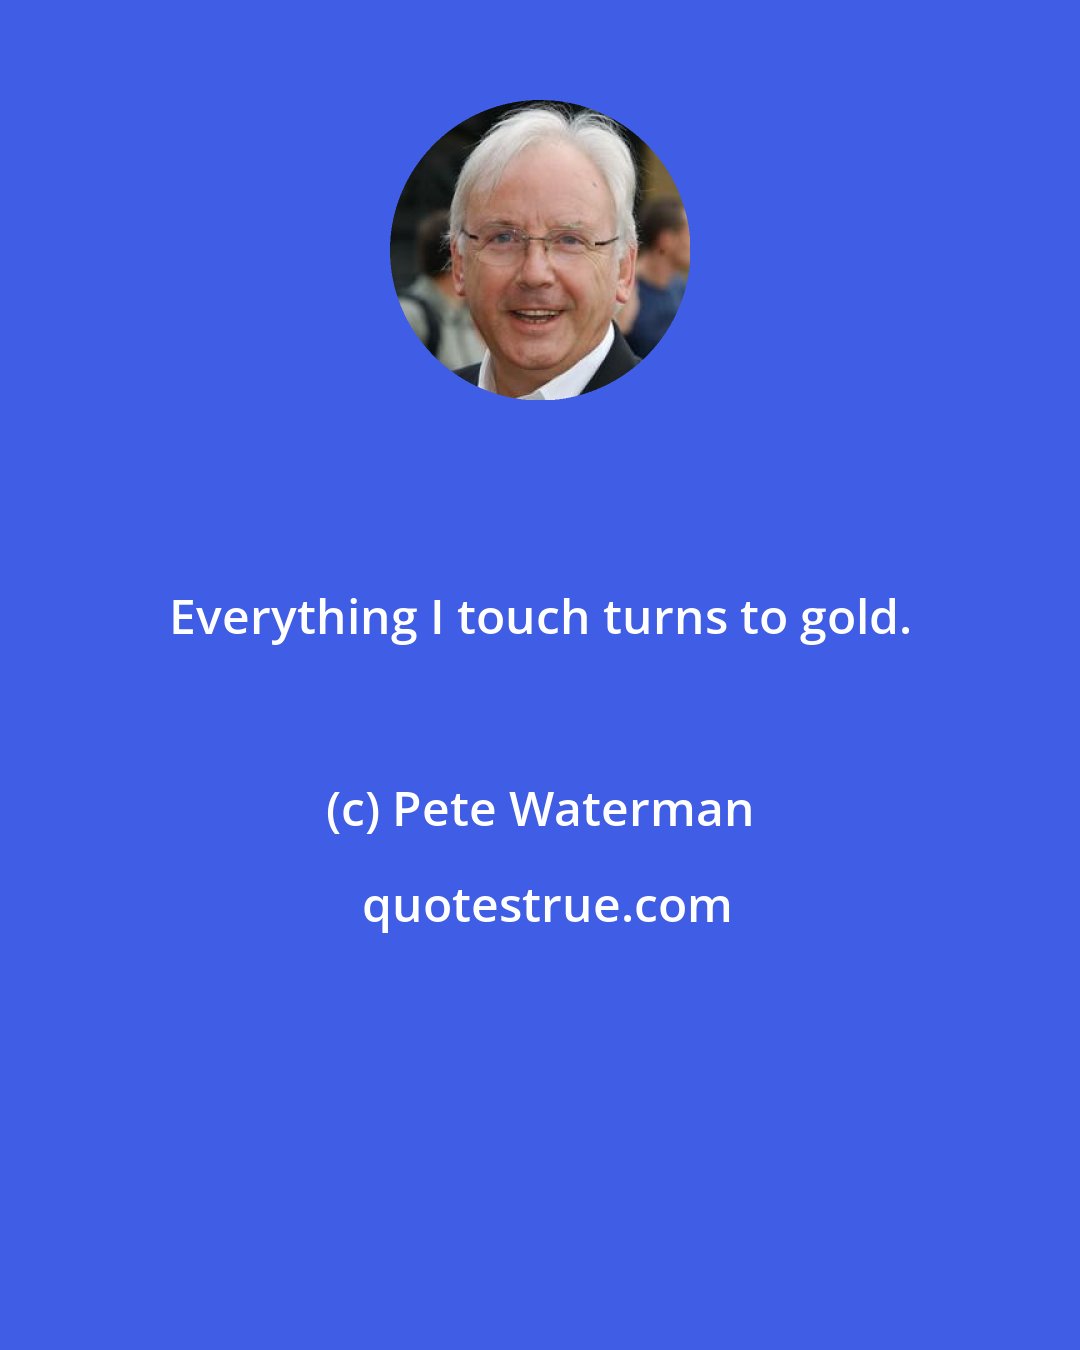 Pete Waterman: Everything I touch turns to gold.